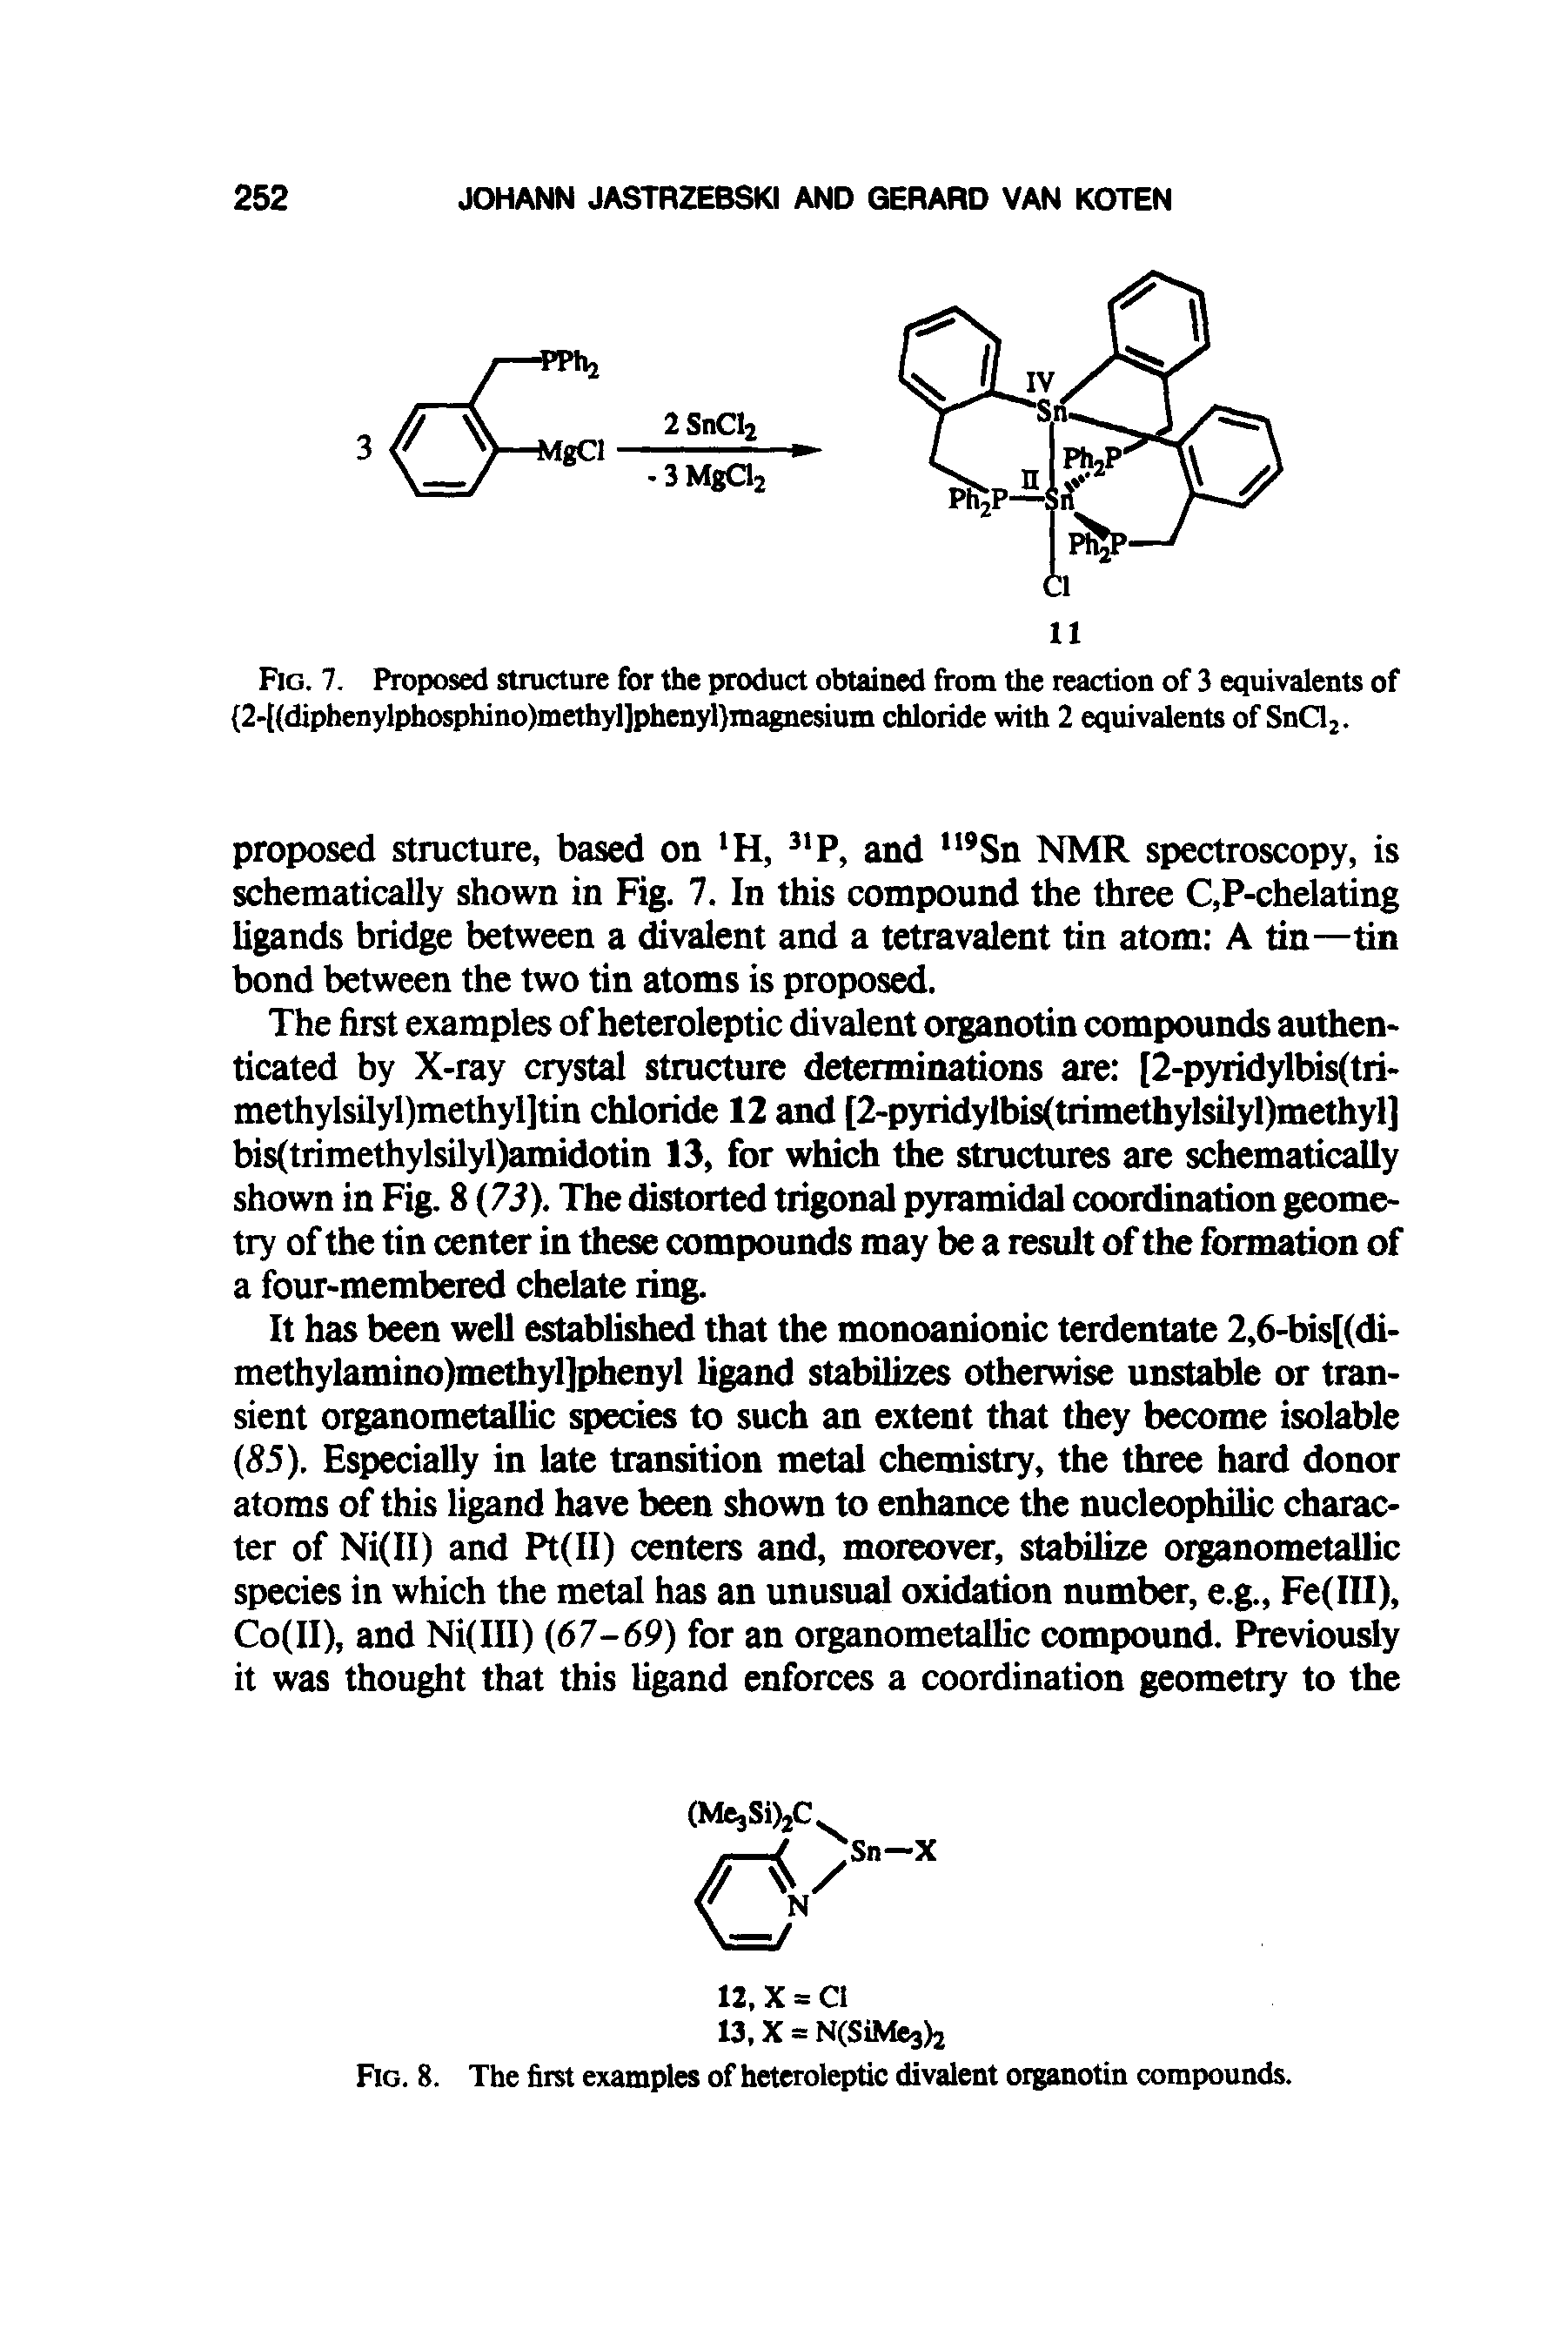 Fig. 8. The first examples of heteroleptic divalent organotin compounds.